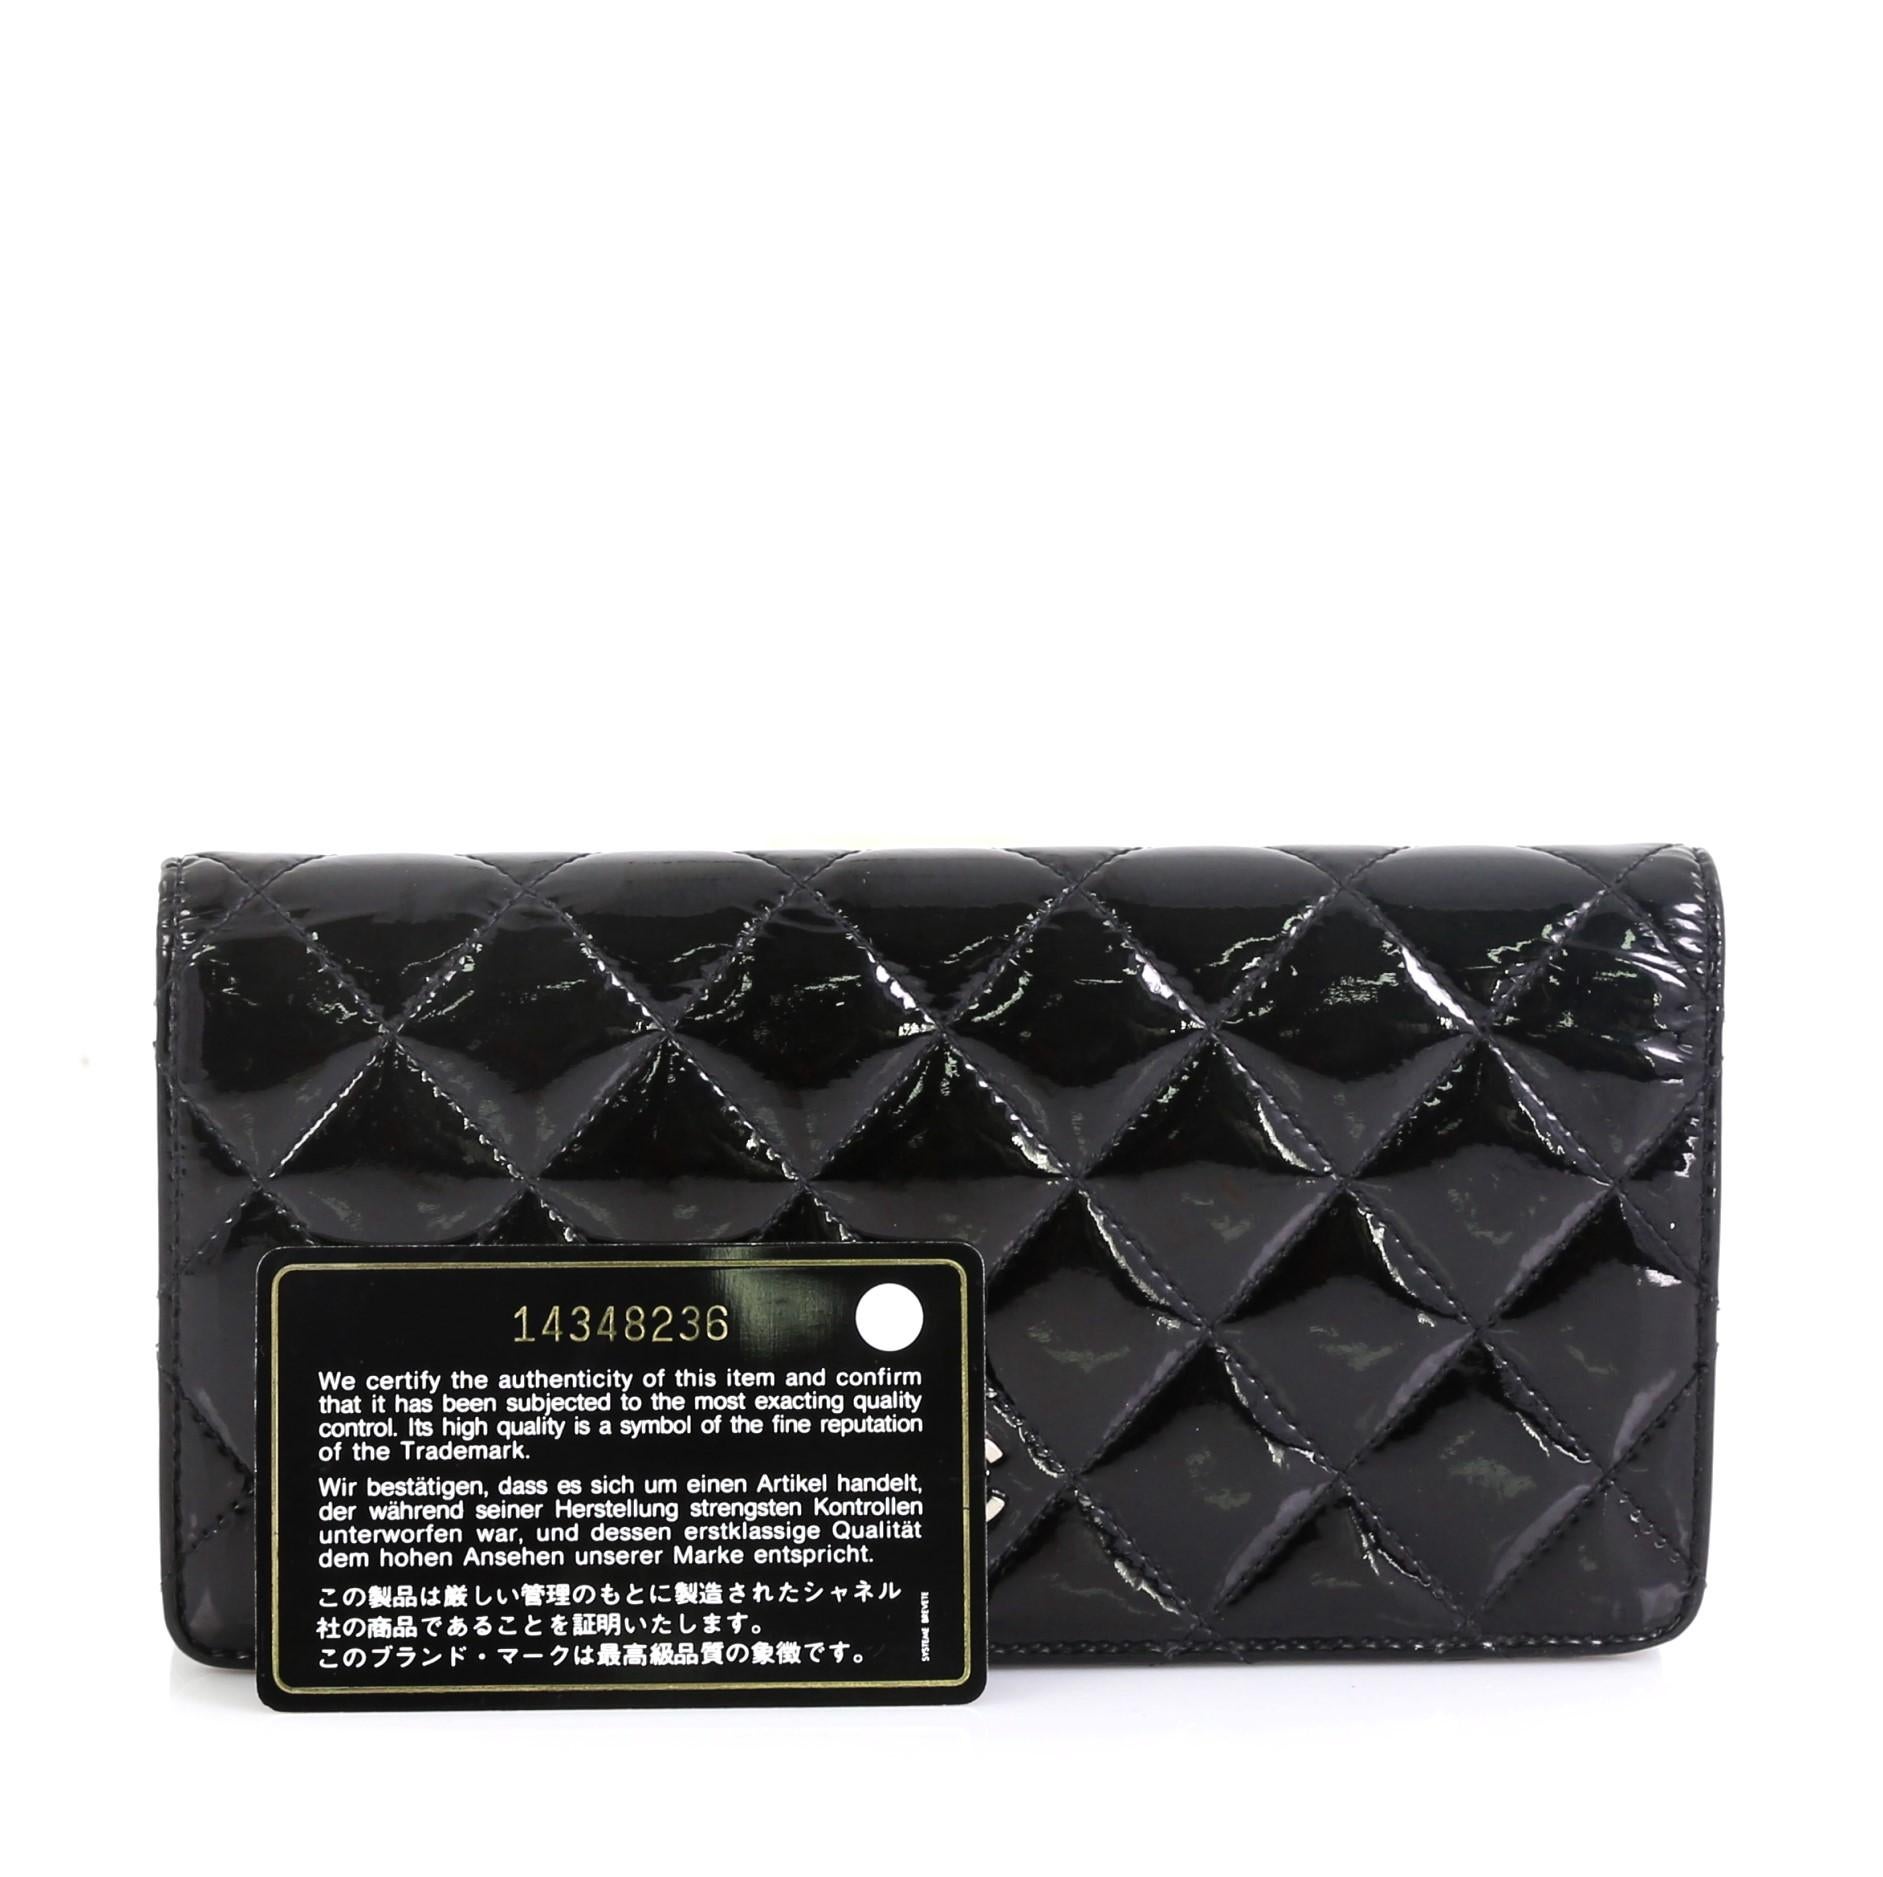 This Chanel Bi-Fold Wallet Quilted Patent, crafted from black patent leather, features Chanel's signature diamond quilted design textured CC logo at front and silver-tone hardware. It opens to a black leather interior with multiple card slots, zip